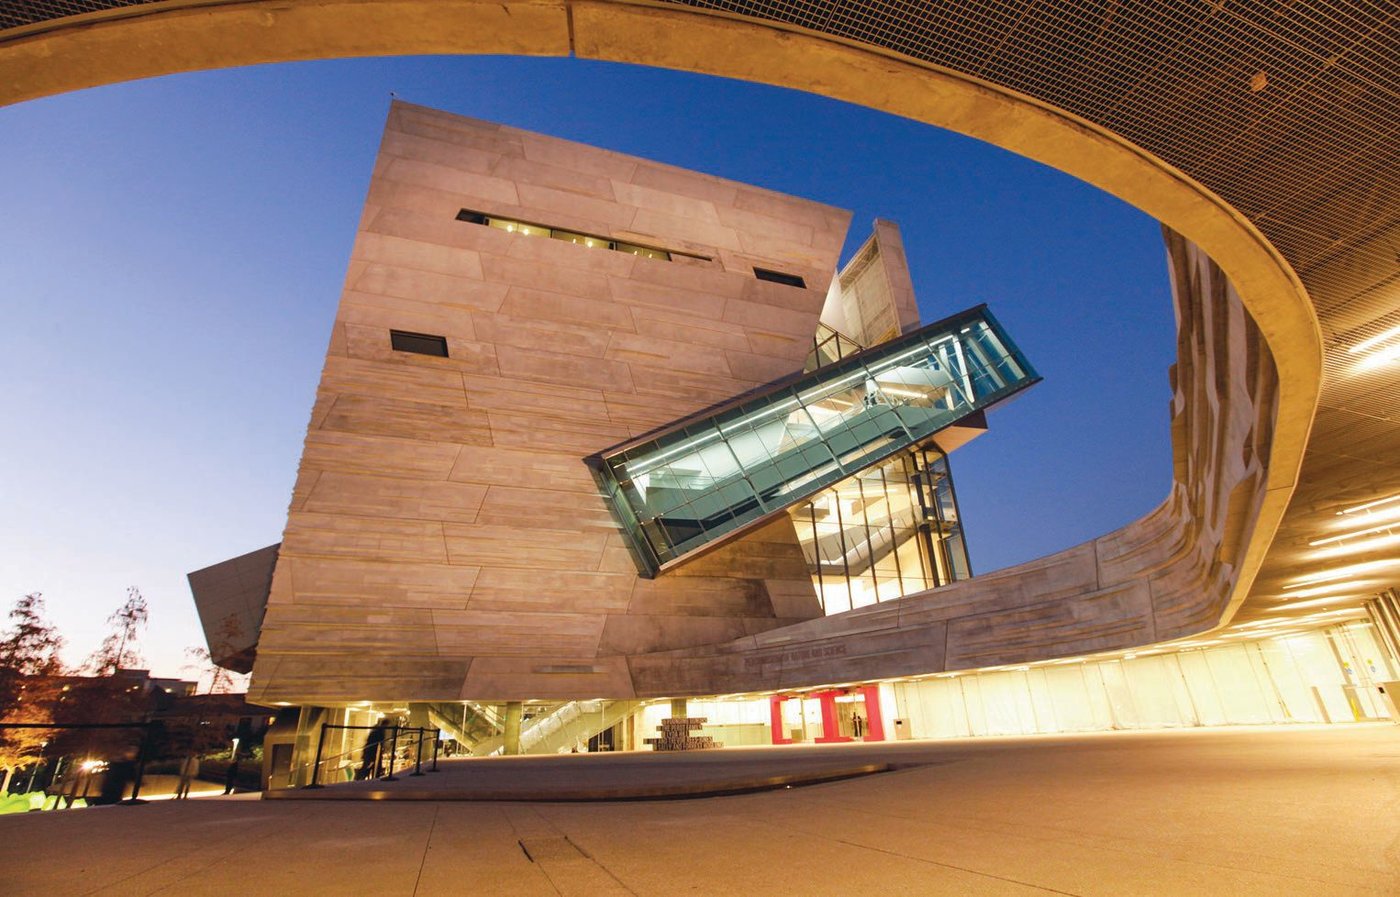 Luminous skies surround the museum. PHOTO COURTESY OF THE PEROT MUSEUM OF NATURE AND SCIENCE